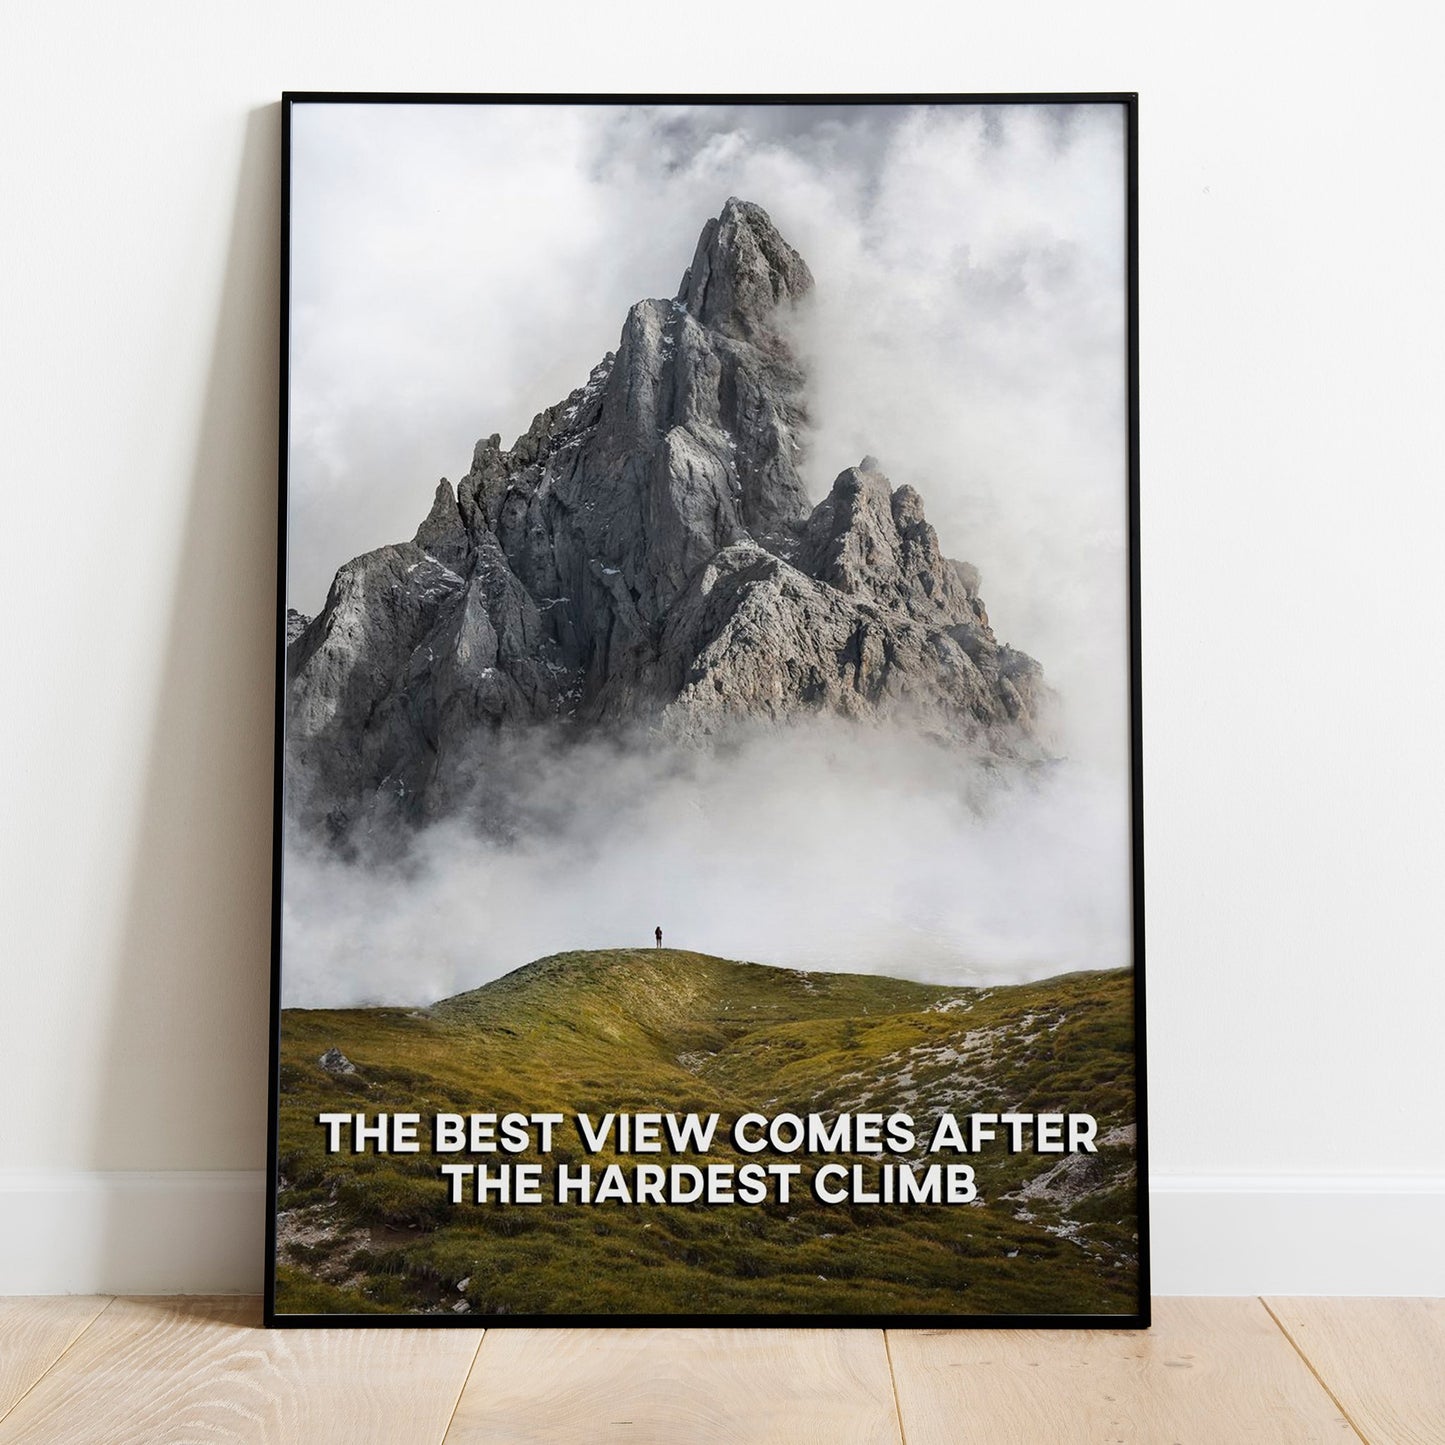 THE HARDEST CLIMB Wall Art Poster for Home Office